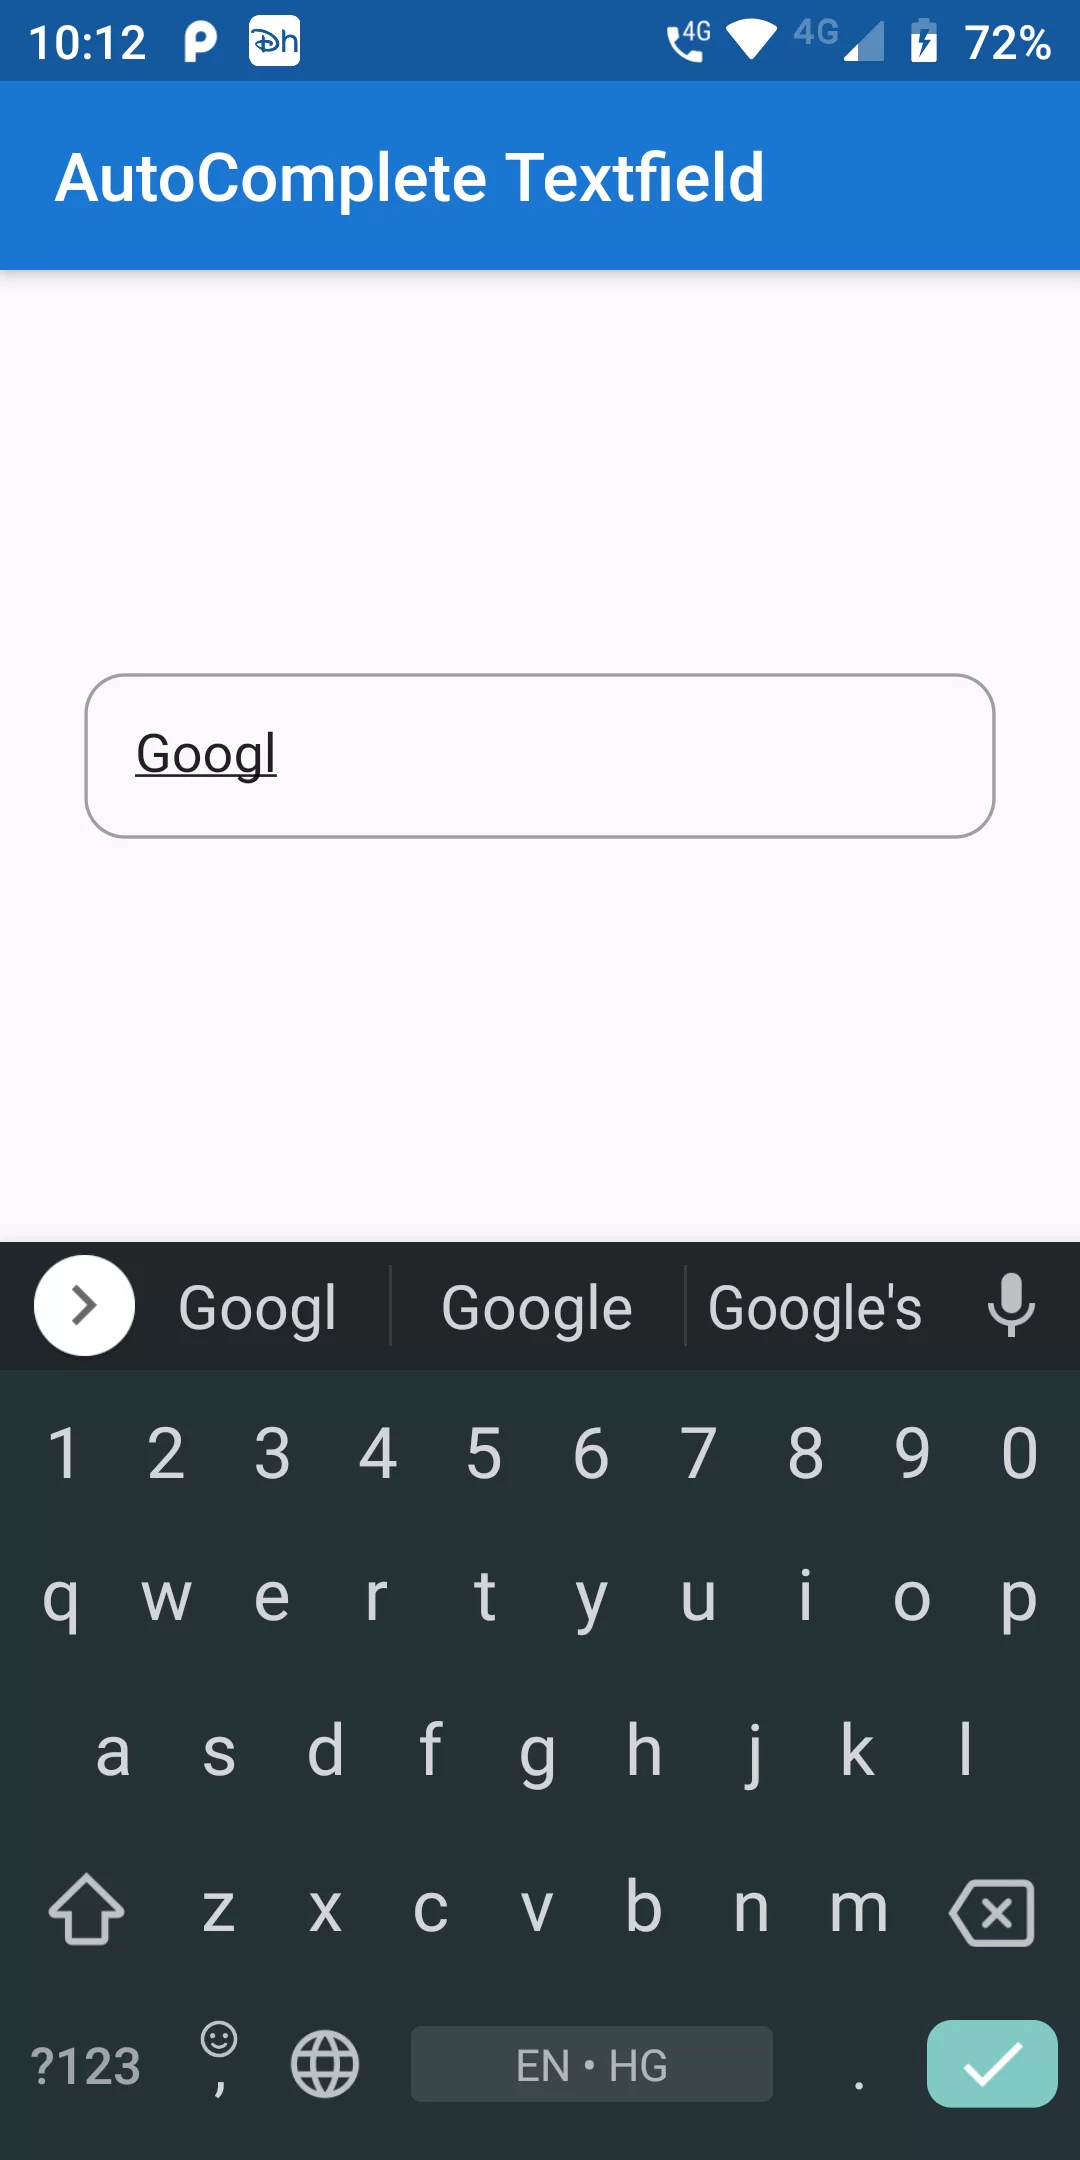 How To Create Autocomplete Textfield Using Flutter App